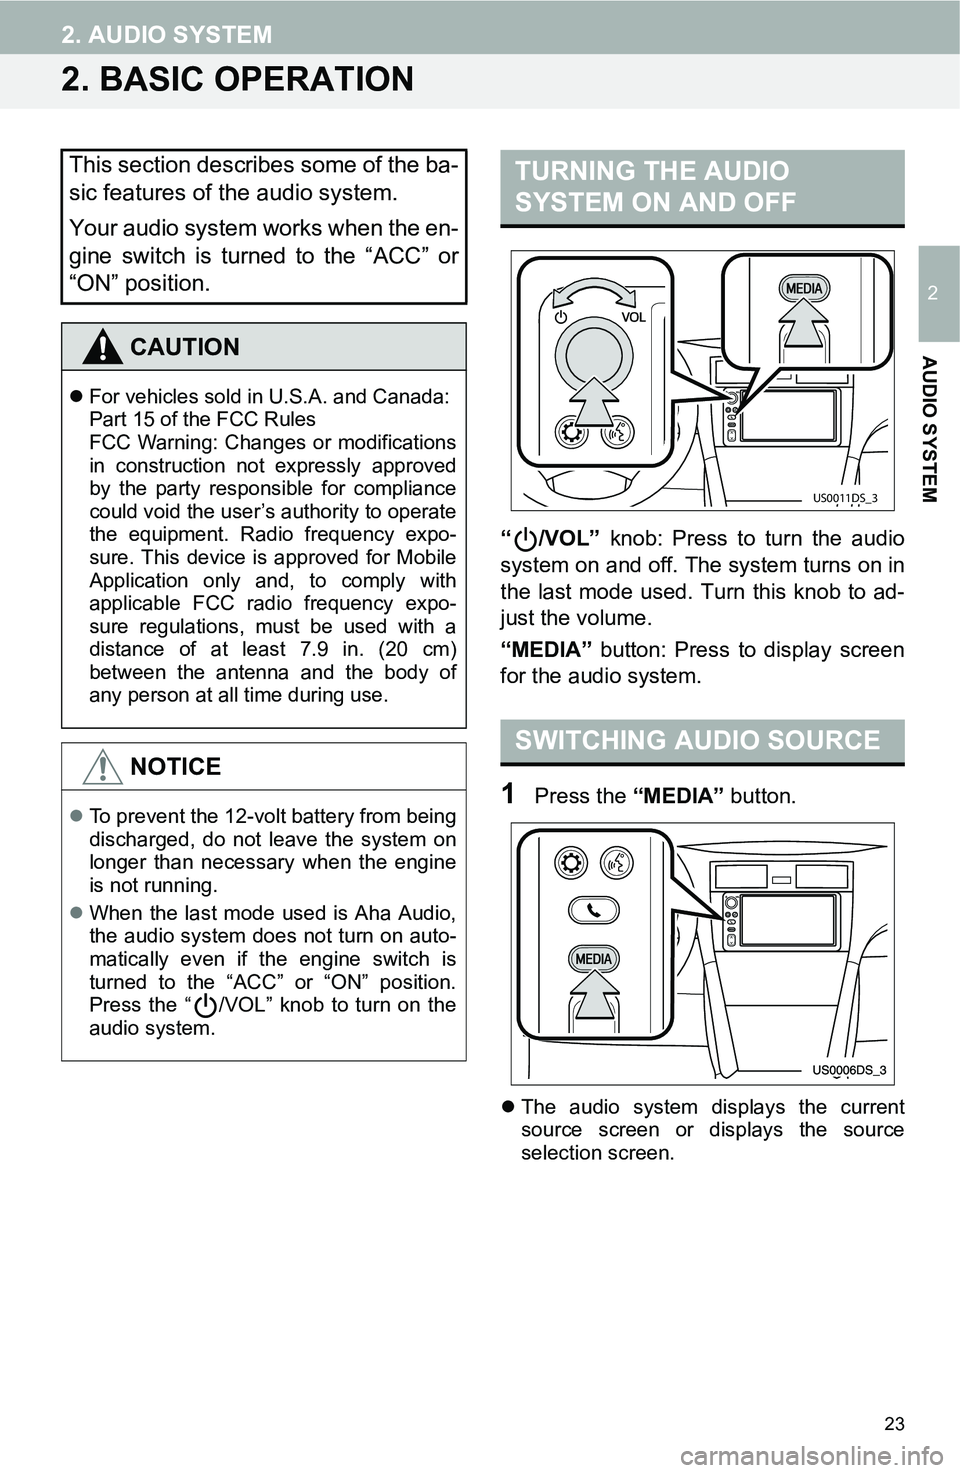 TOYOTA iM 2016  Accessories, Audio & Navigation (in English) 23
2. AUDIO SYSTEM
2
AUDIO SYSTEM
2. BASIC OPERATION
“/VOL” knob: Press to turn the audio
system on and off. The system turns on in
the last mode used. Turn this knob to ad-
just the volume.
“ME